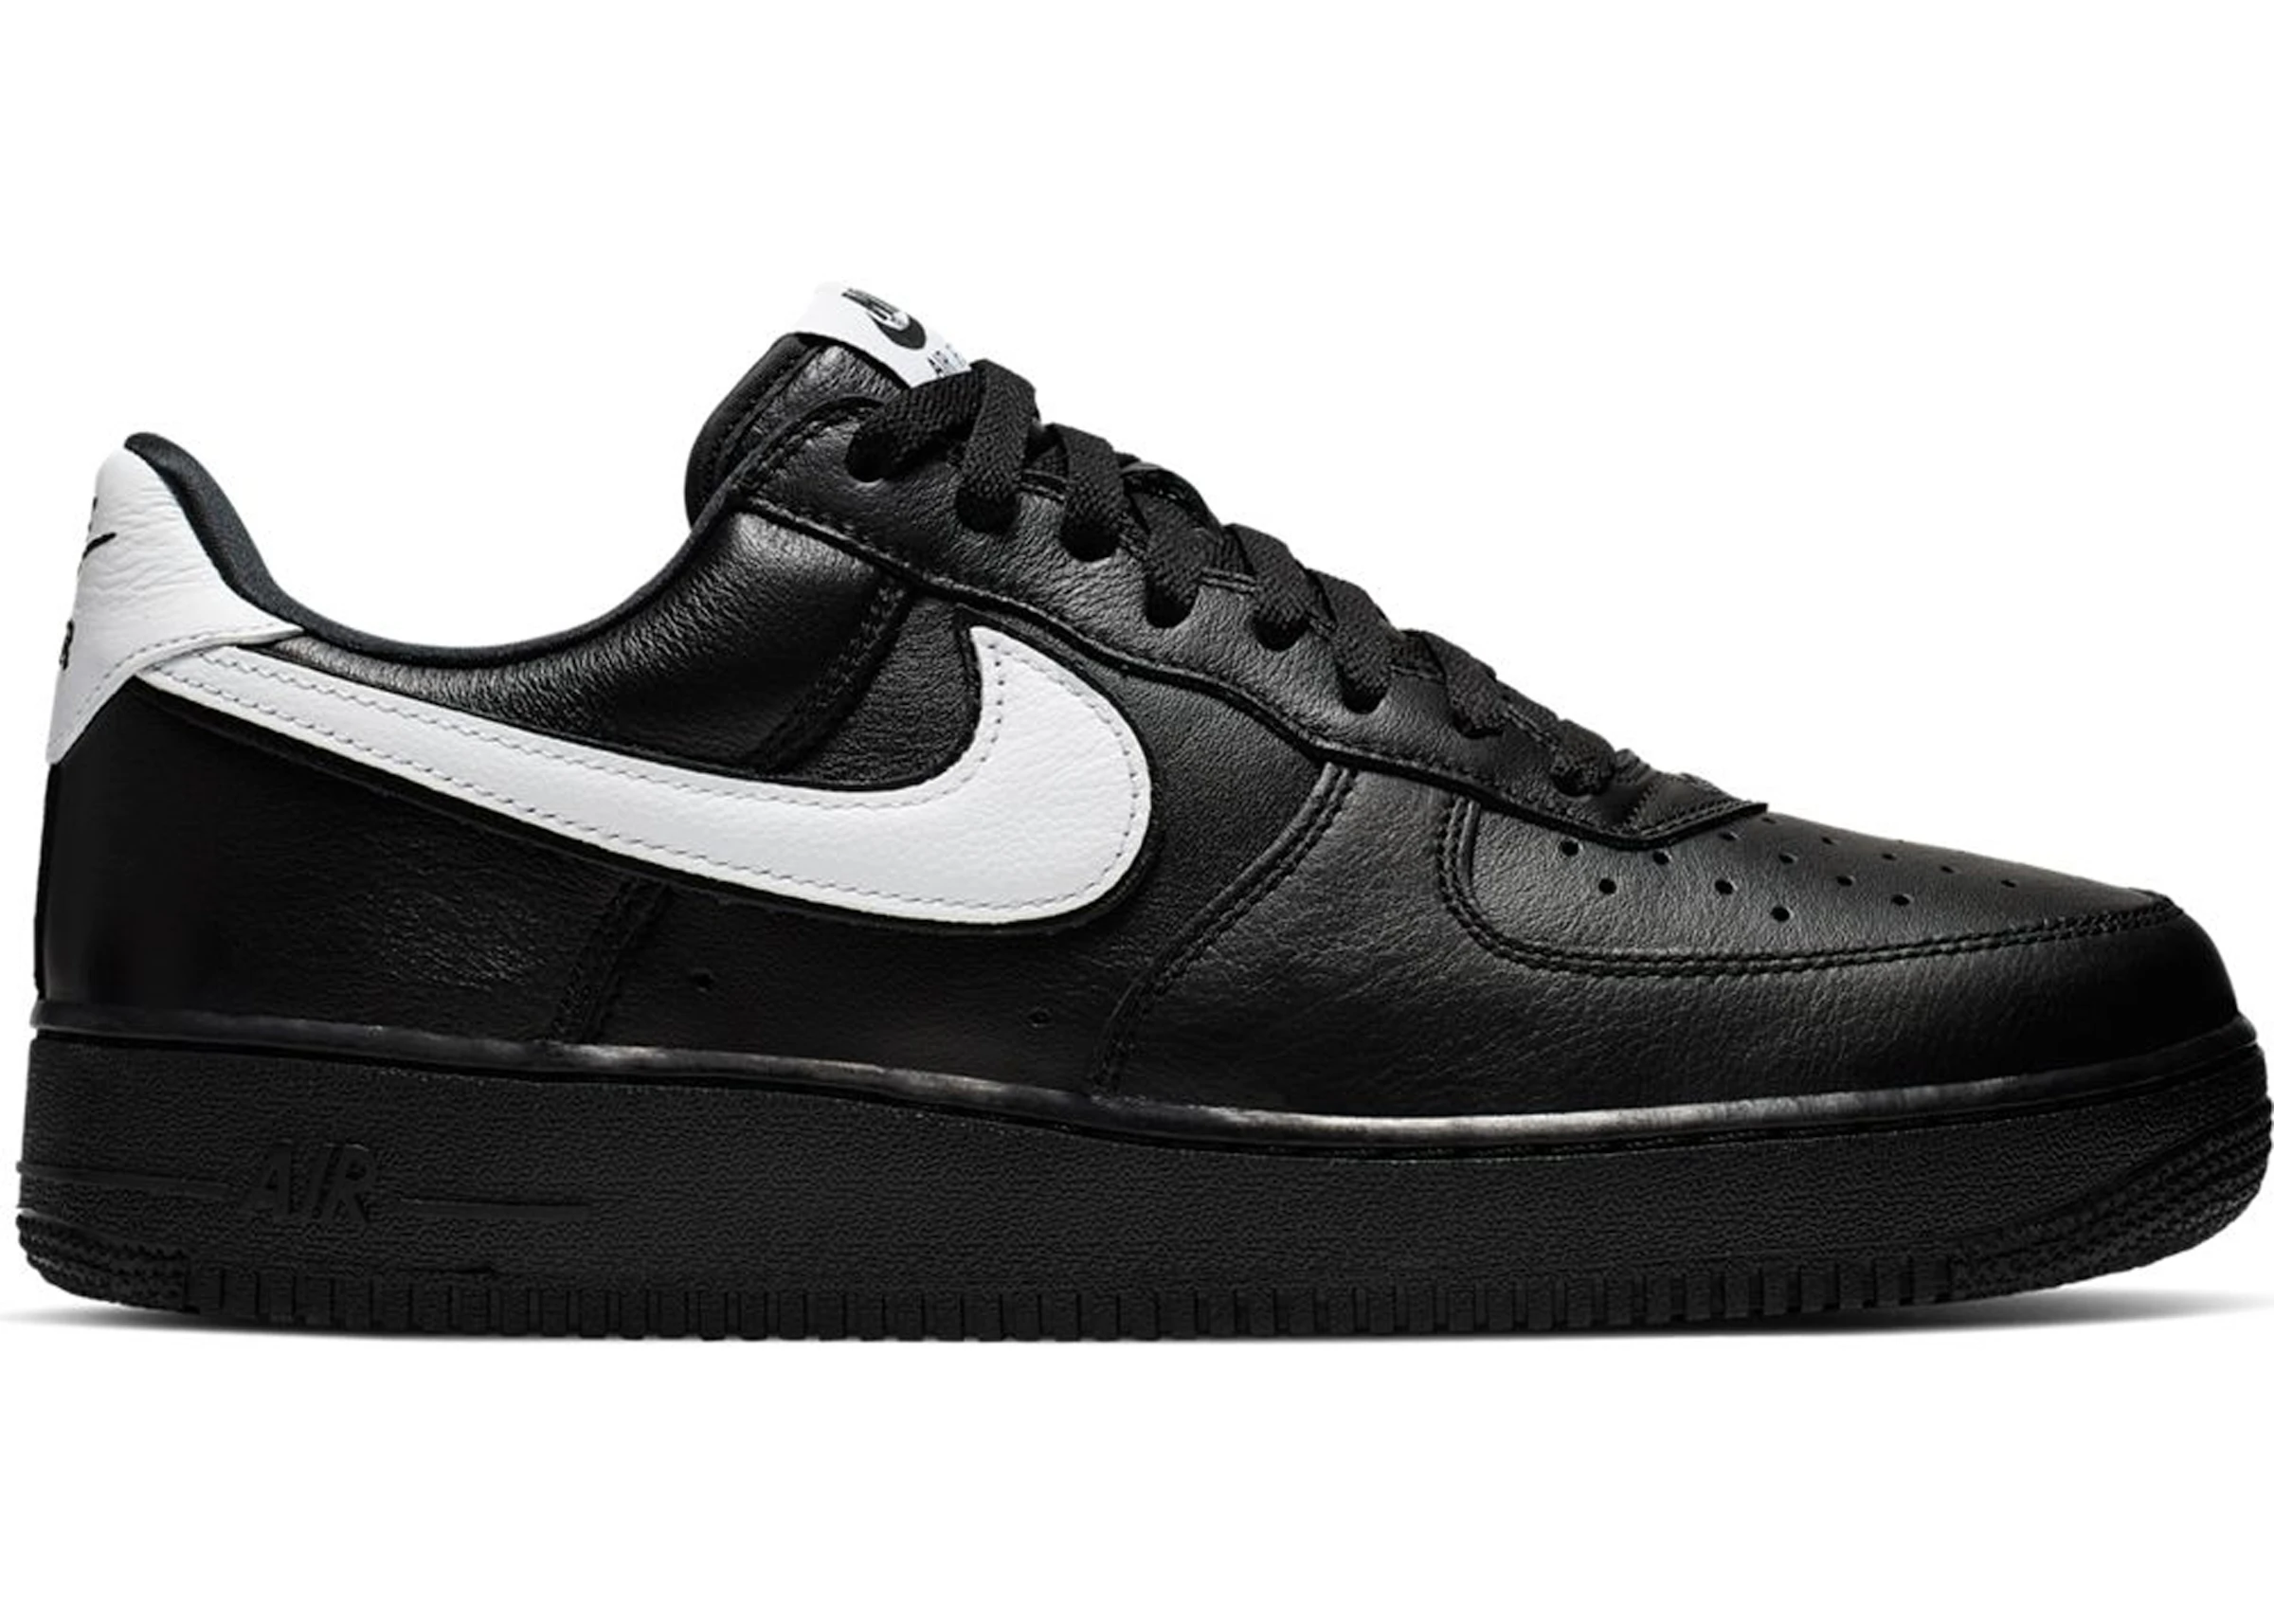 In Klooster oogopslag Nike Air Force 1 Low QS Black White - CQ0492-001 - US